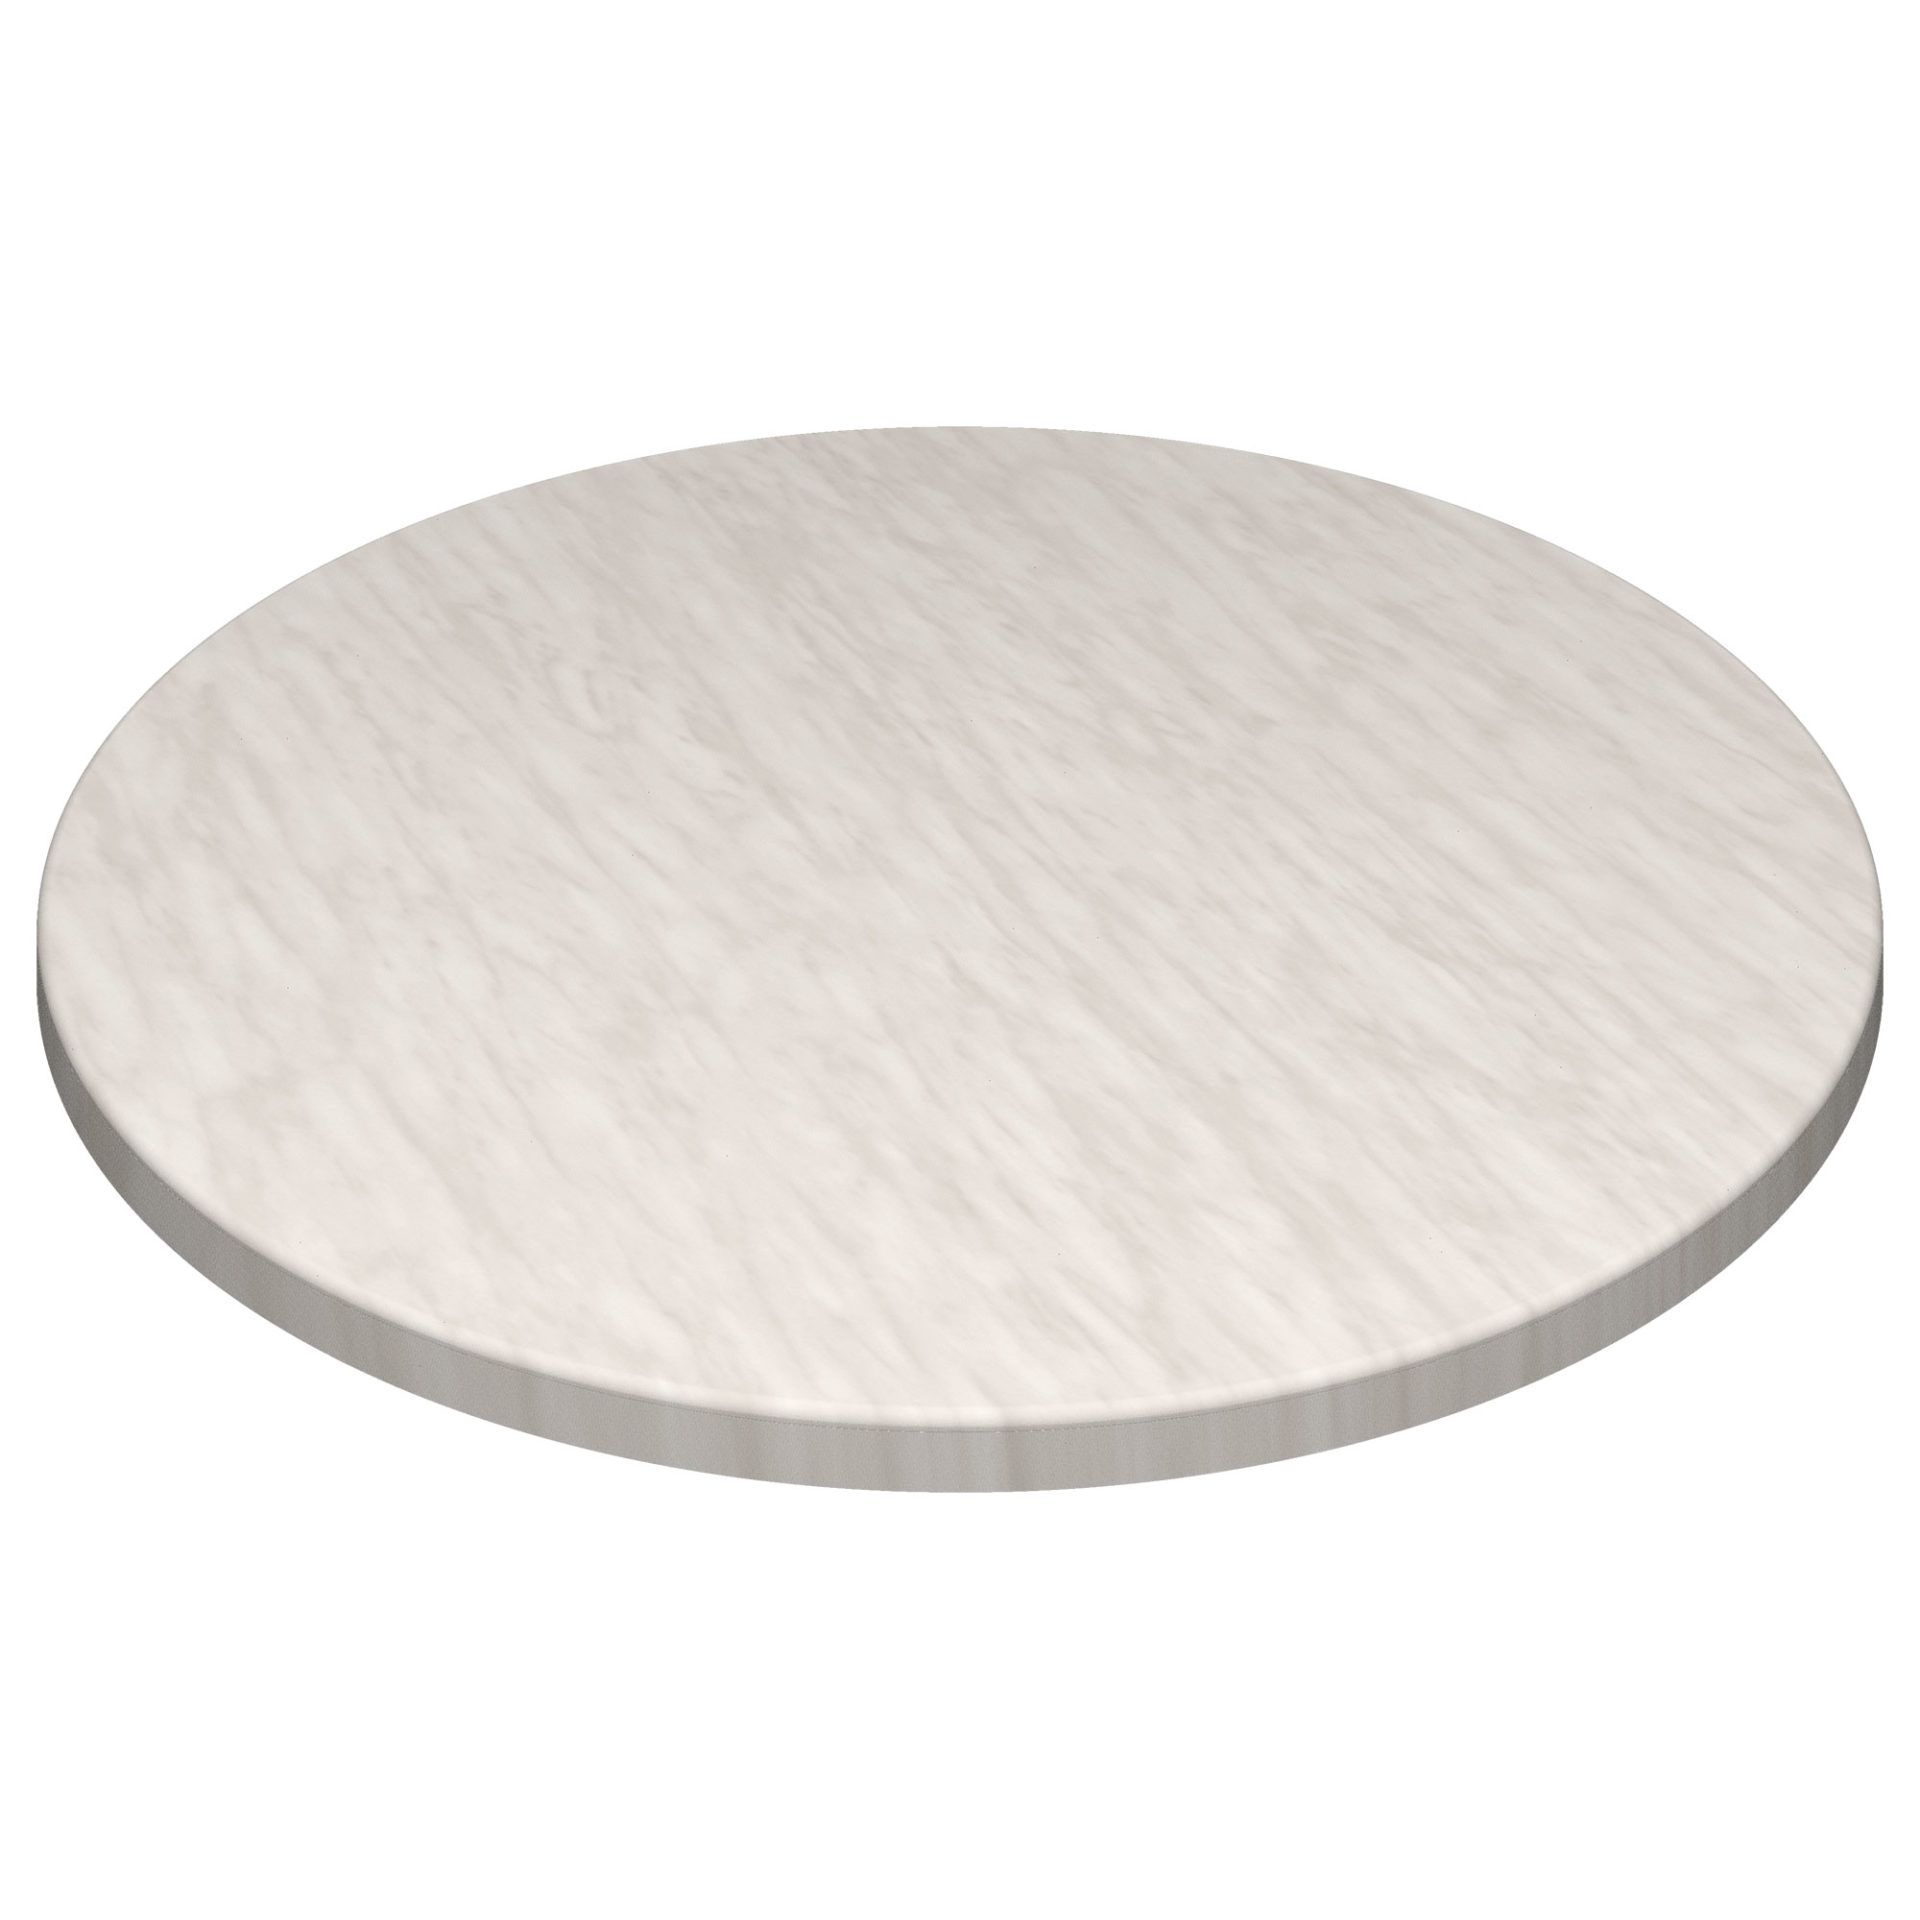 Werzalit Marble 700mm Diameter Duratop by SM France